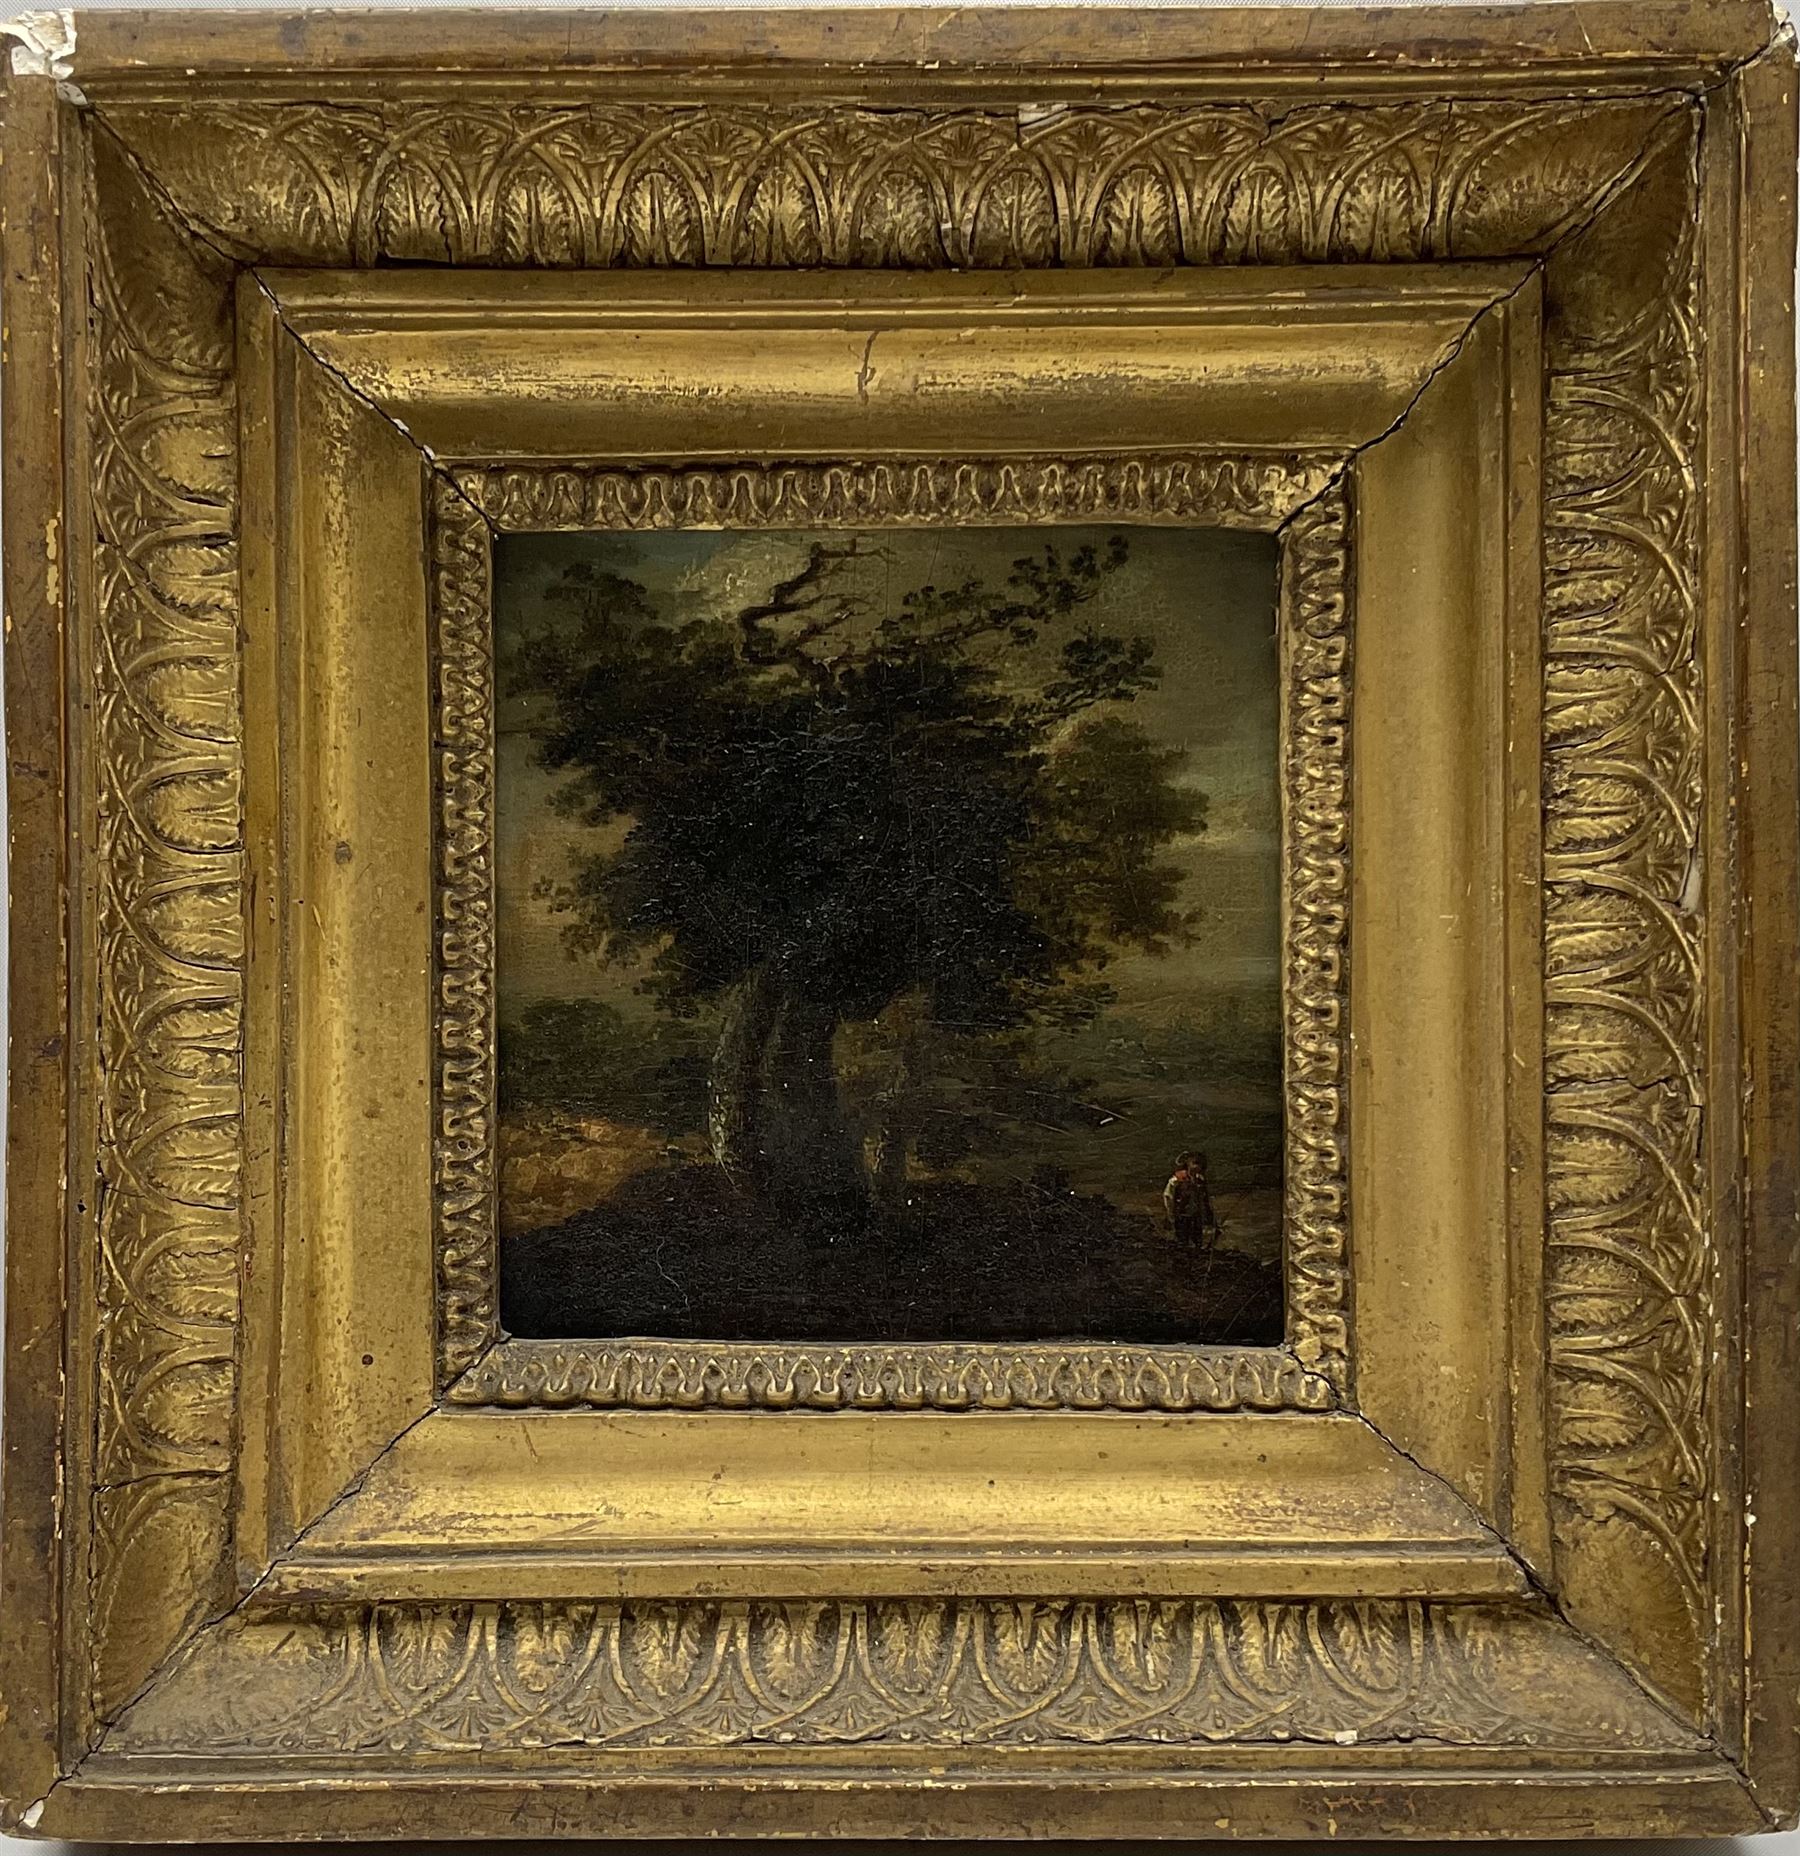 English School (18th century): Wooded Landscape - Image 2 of 3